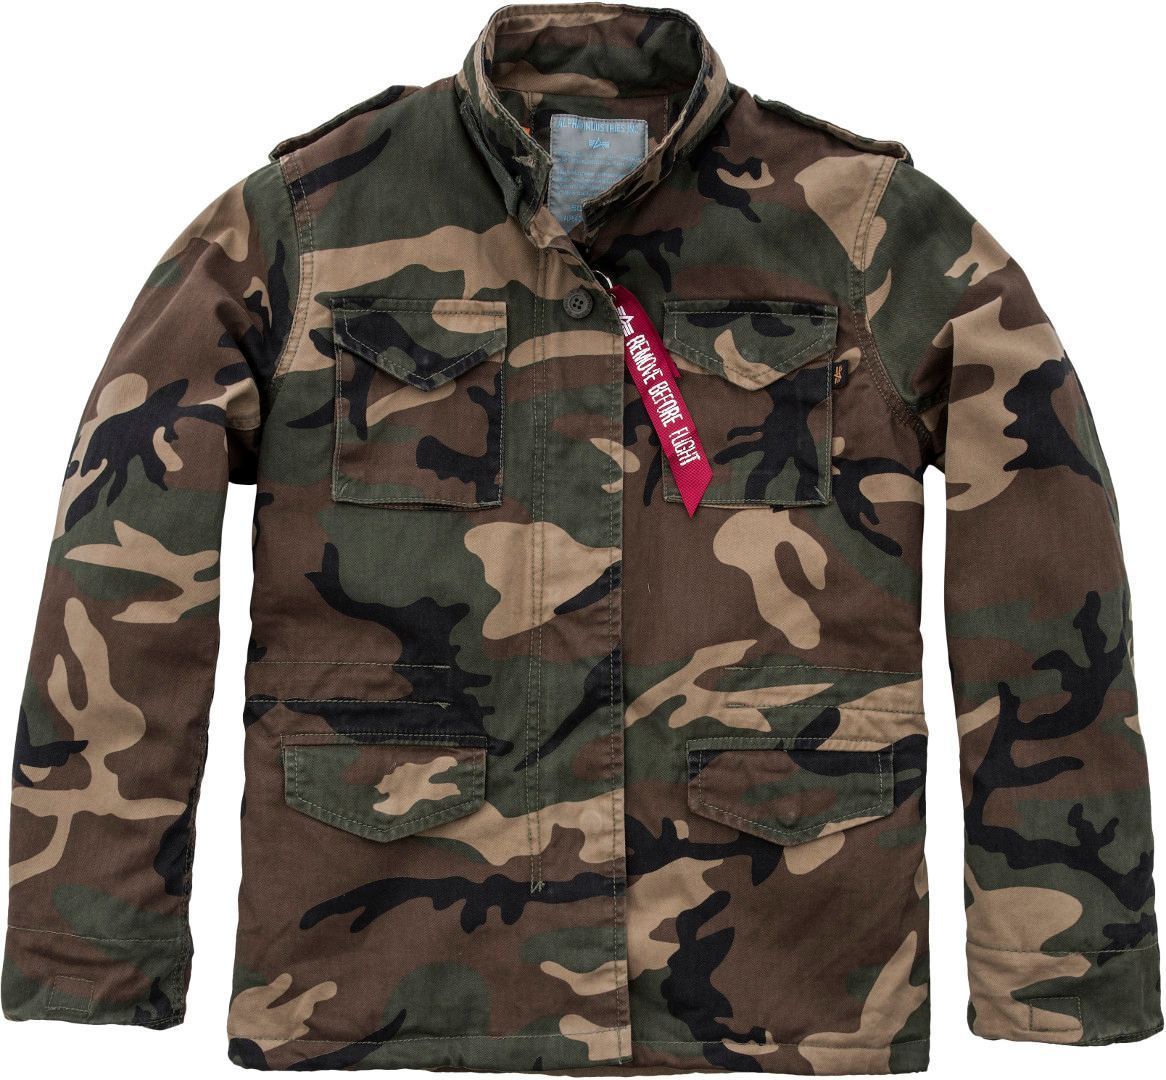 Image of Alpha Industries Vintage M-65 CW Giacca donna, multicolore, dimensione S per donne